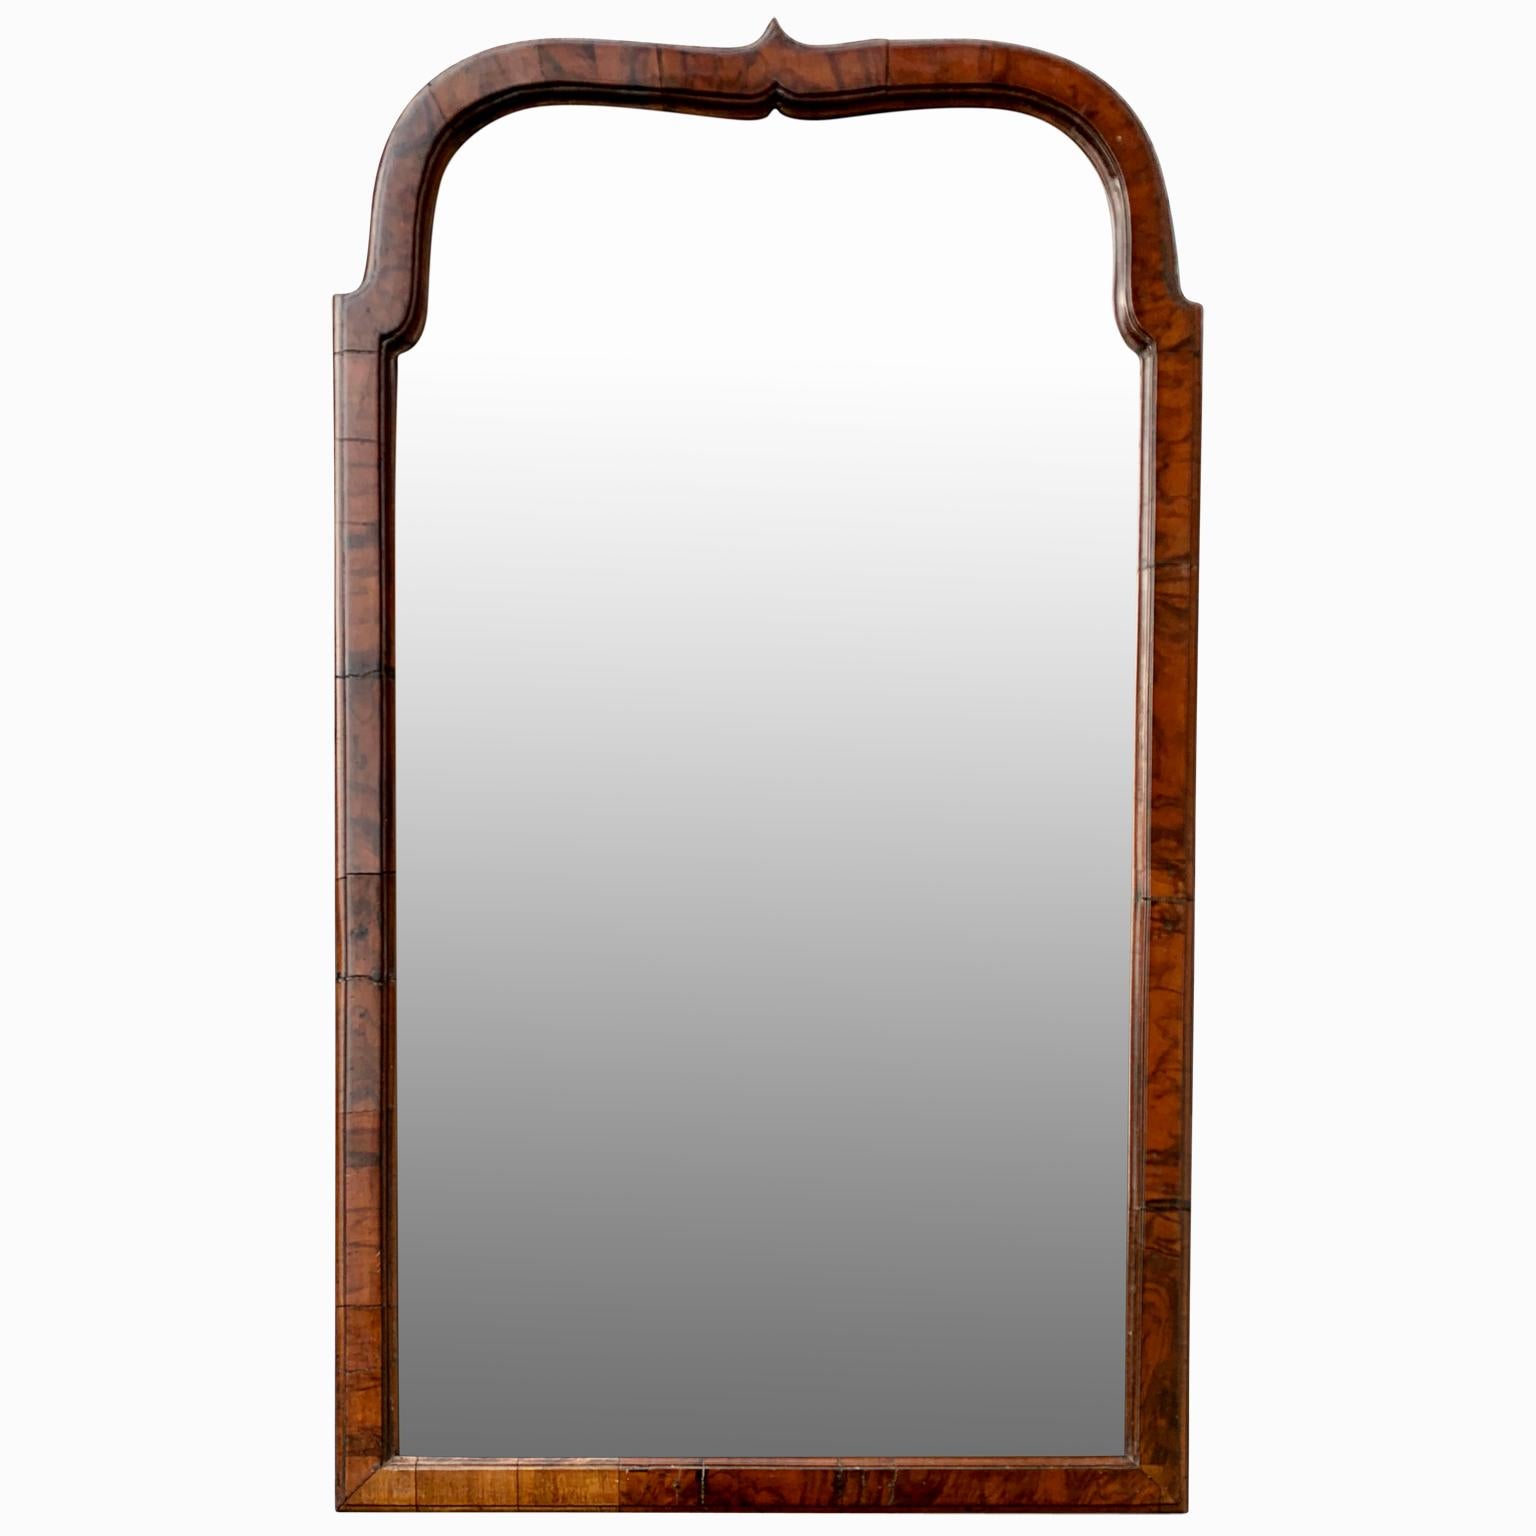 Swedish Baroque walnut veneer mirror from the castle of Rosendal outside Helsingborg in Sweden (see pictures of the castle). The castle were sold around 3 years ago and all the inventory went to auction where this mirror was bought.

The mirror is